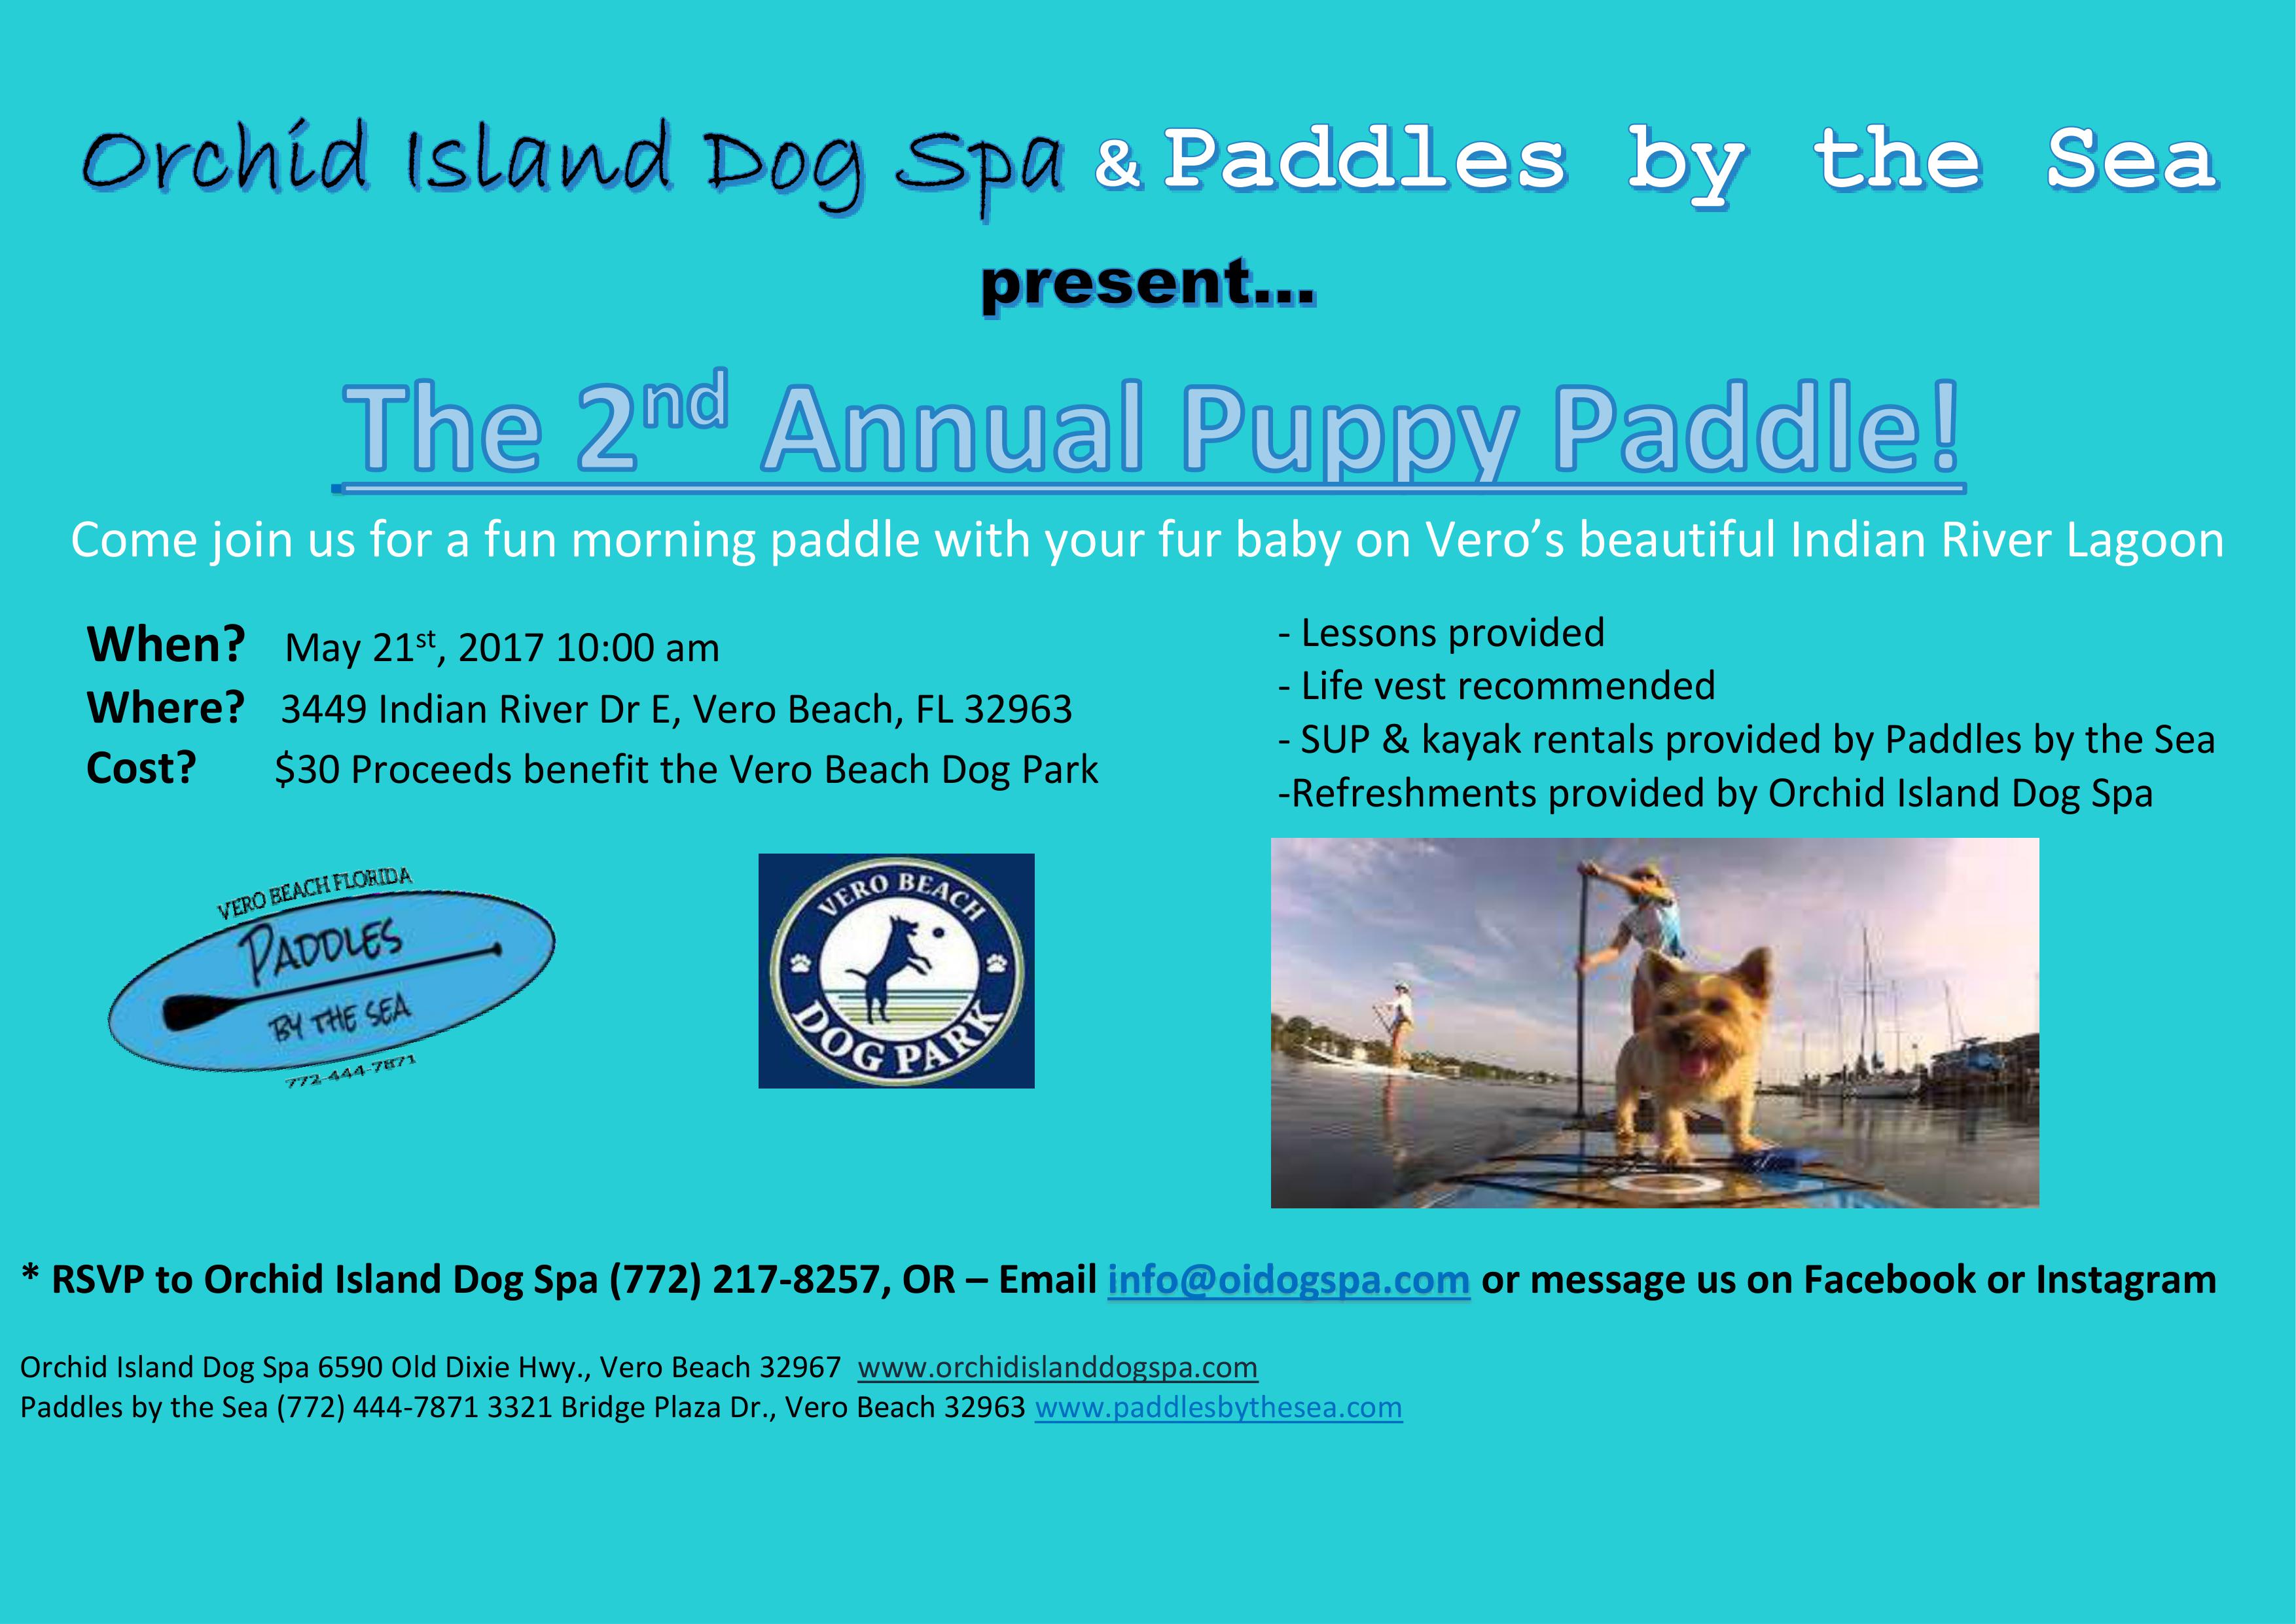 2nd Annual Puppy Paddle for the Vero Beach Dog Park